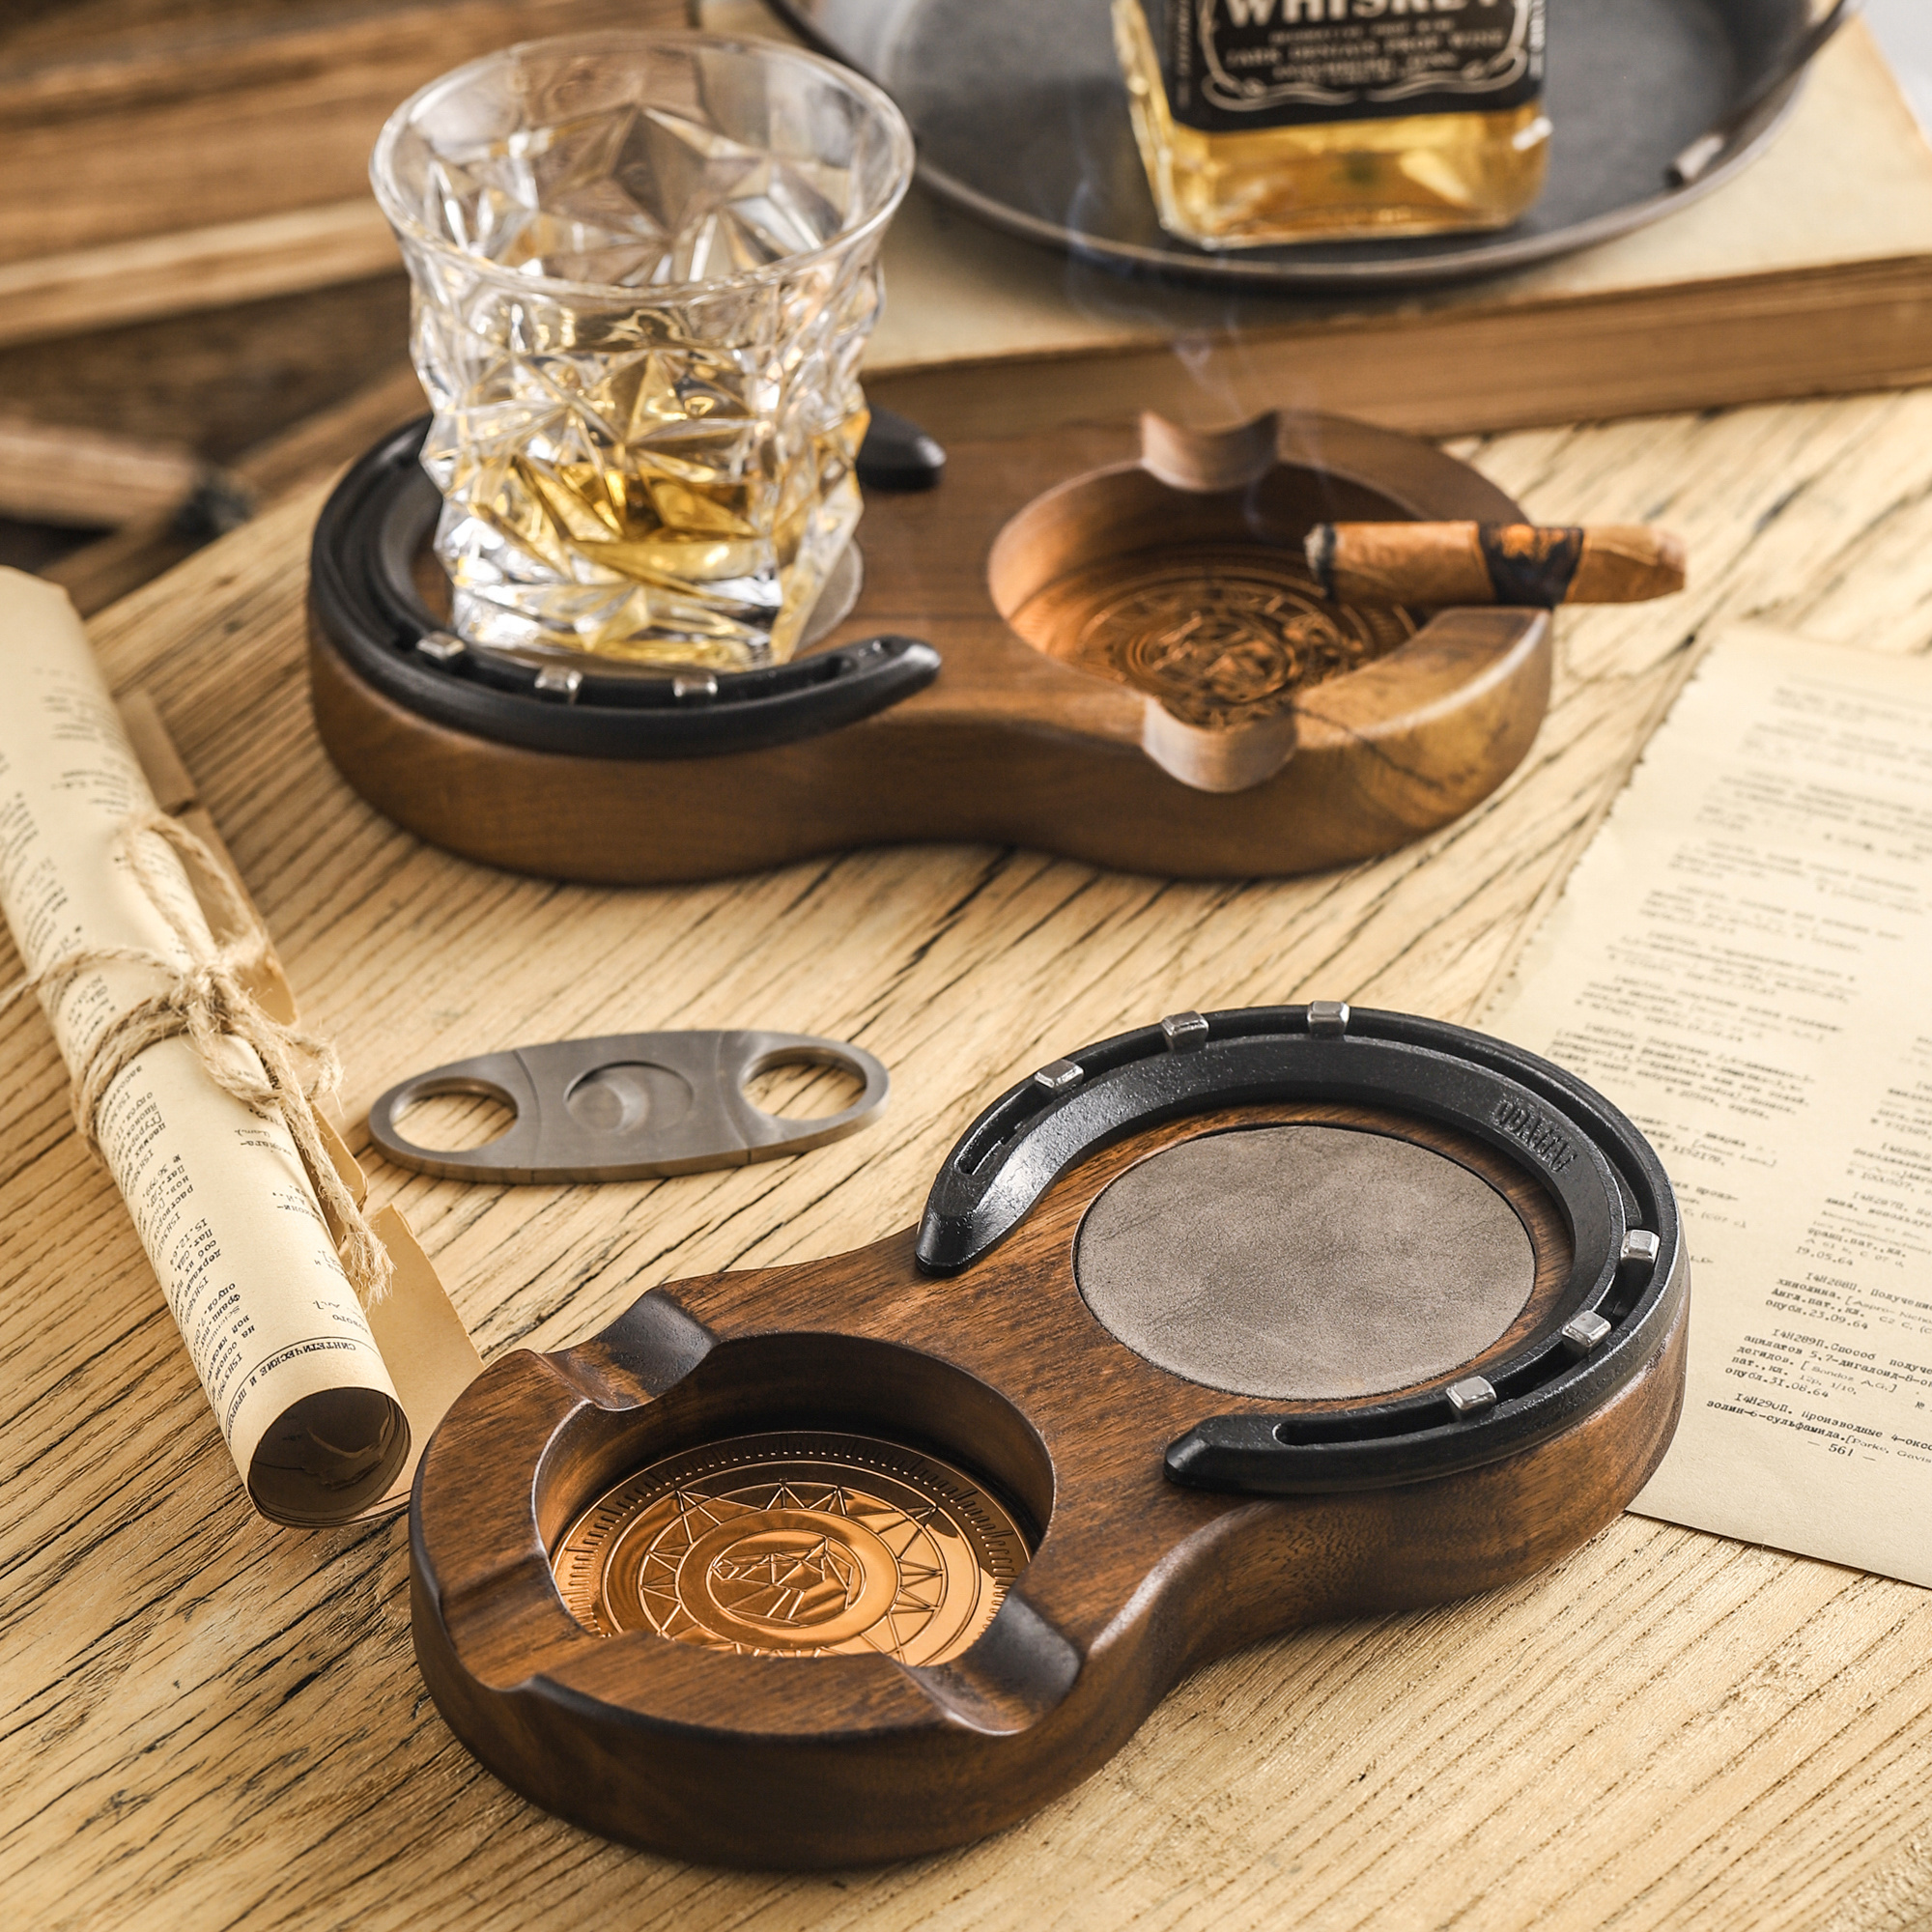 1pc wooden cigar ashtray handmade horseshoe design cigar accessories with 3 cigar slot portable travel cigar gifts for men indoor outdoor patio home office use details 4